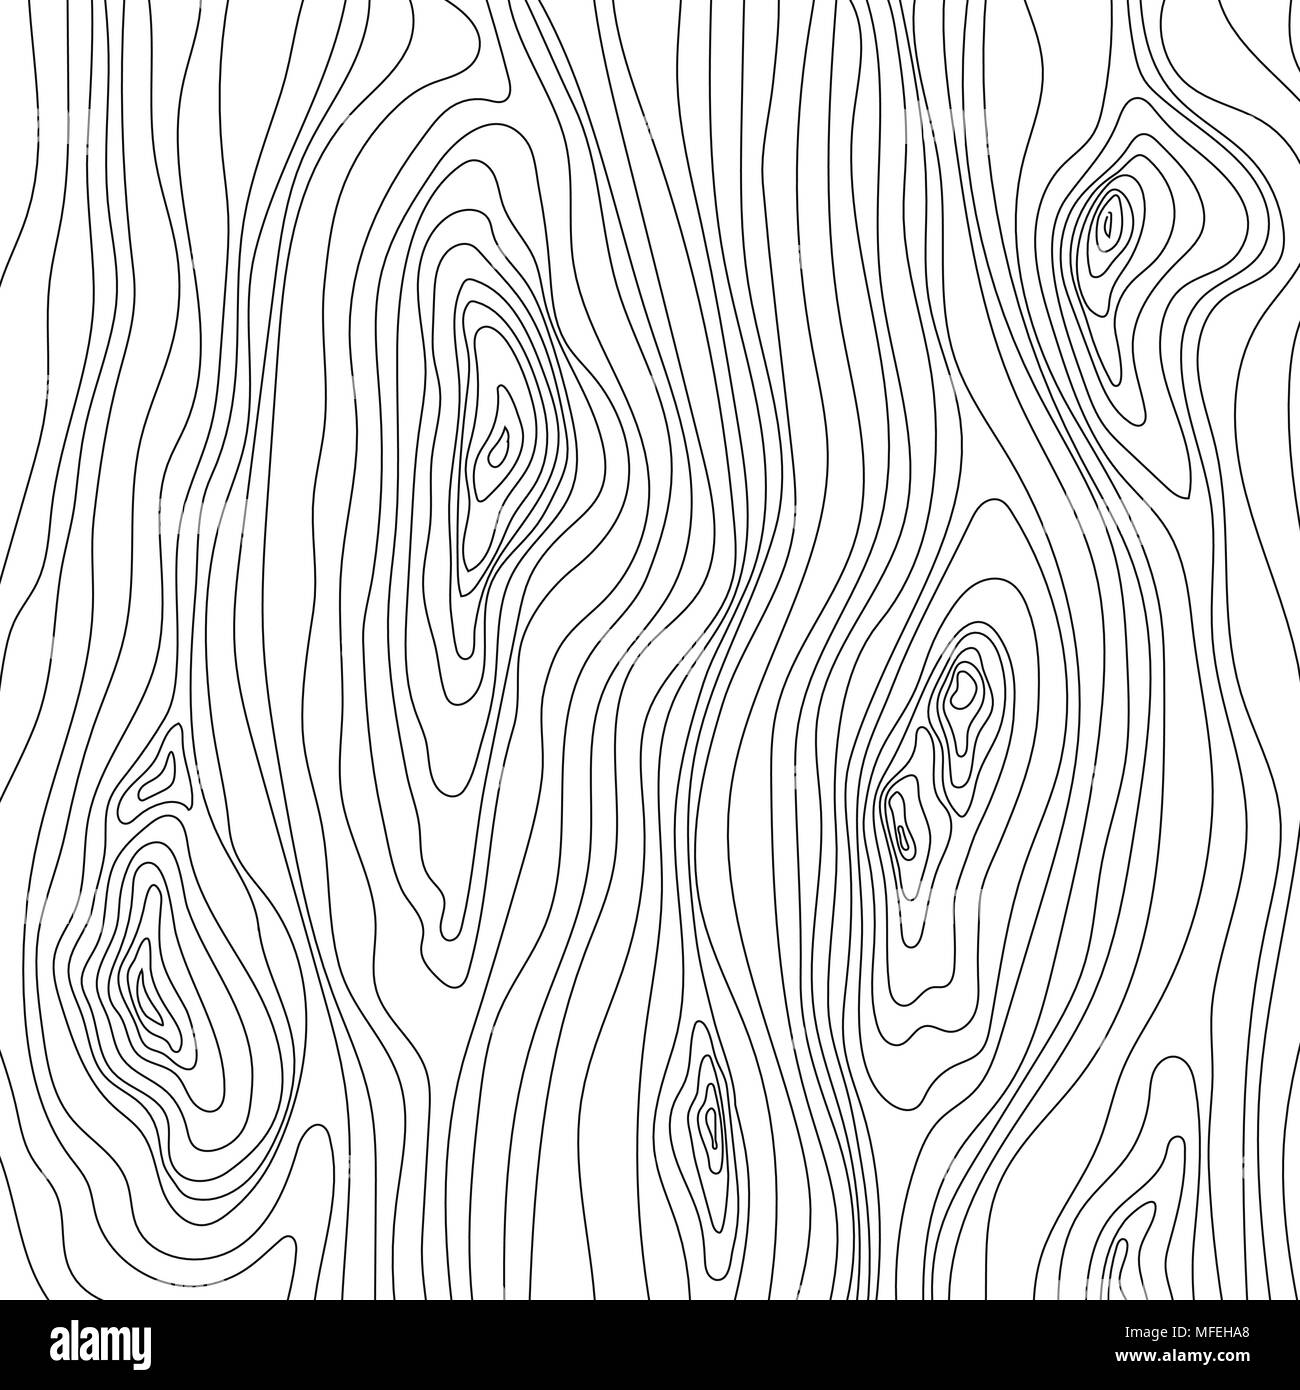 Wood Grain Texture Seamless Wooden Pattern Abstract Line Background Images